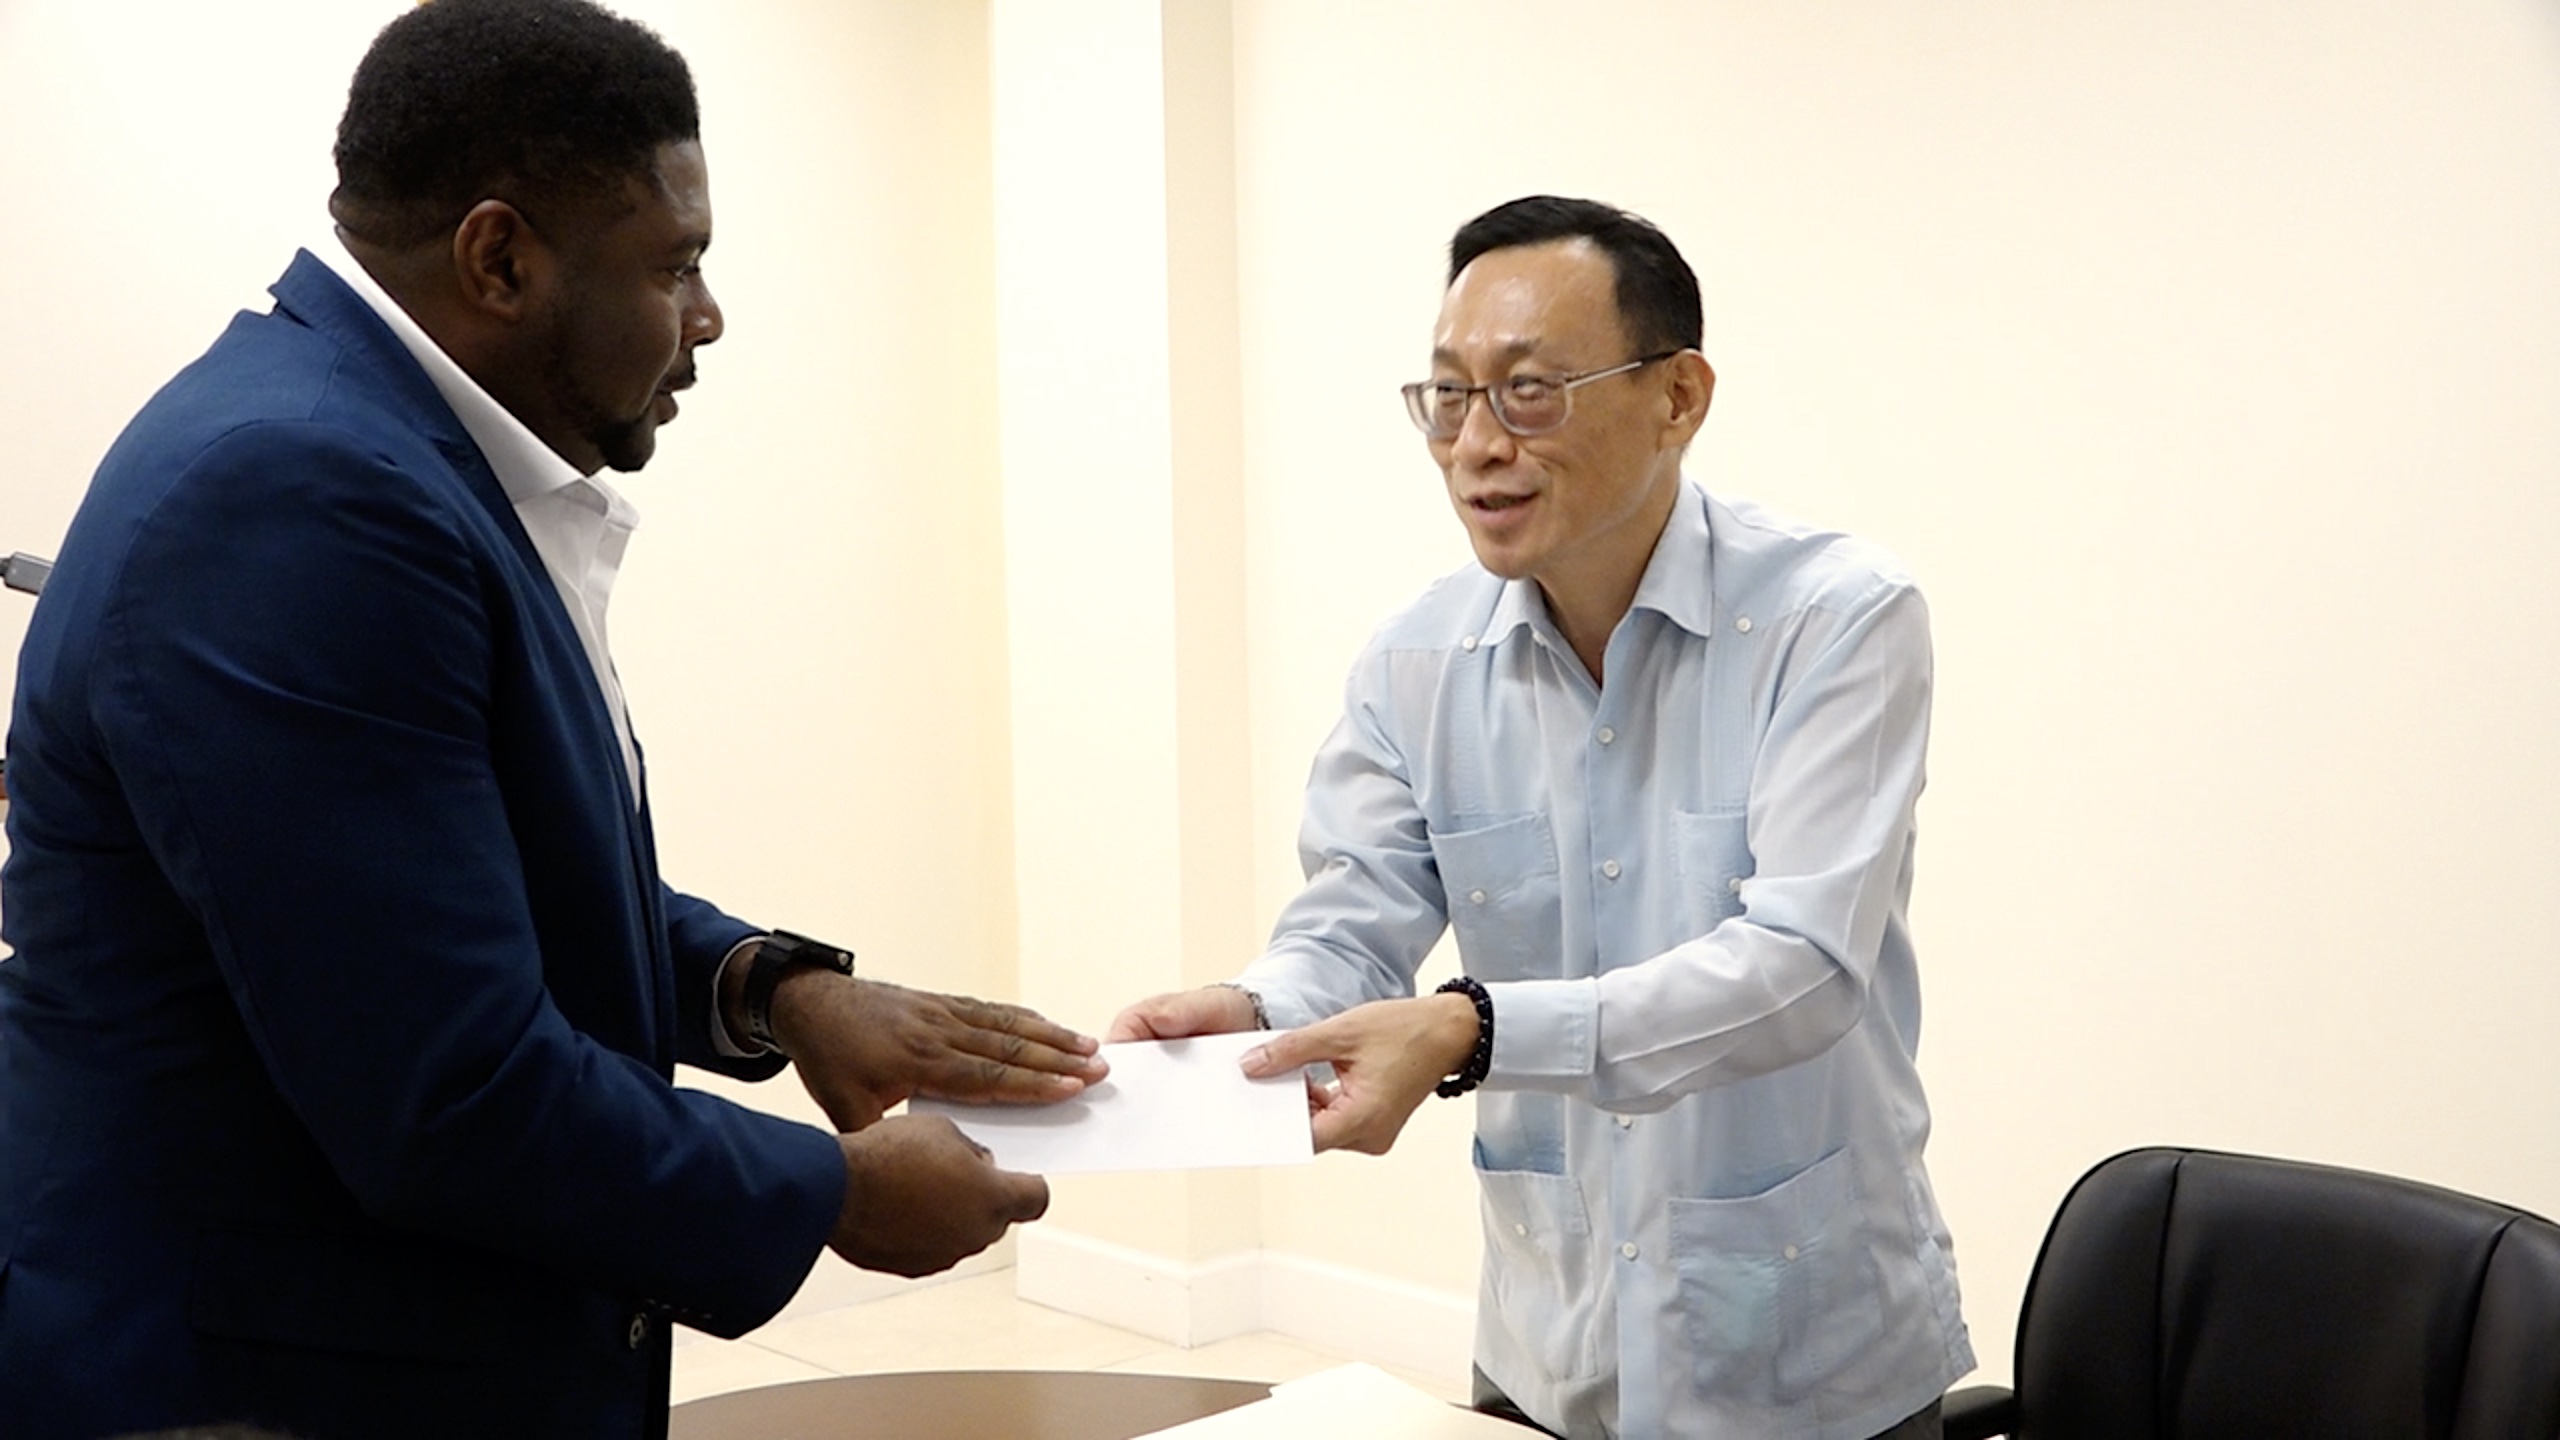 The Republic of China (Taiwan) Resident Ambassador to St. Kitts and Nevis, His Excellency Michael Lin presents a US$15,000 cheque for the STEM programme to Hon. Troy Liburd, Minister of Education in the Nevis Island Administration recently at Pinney’s Estate